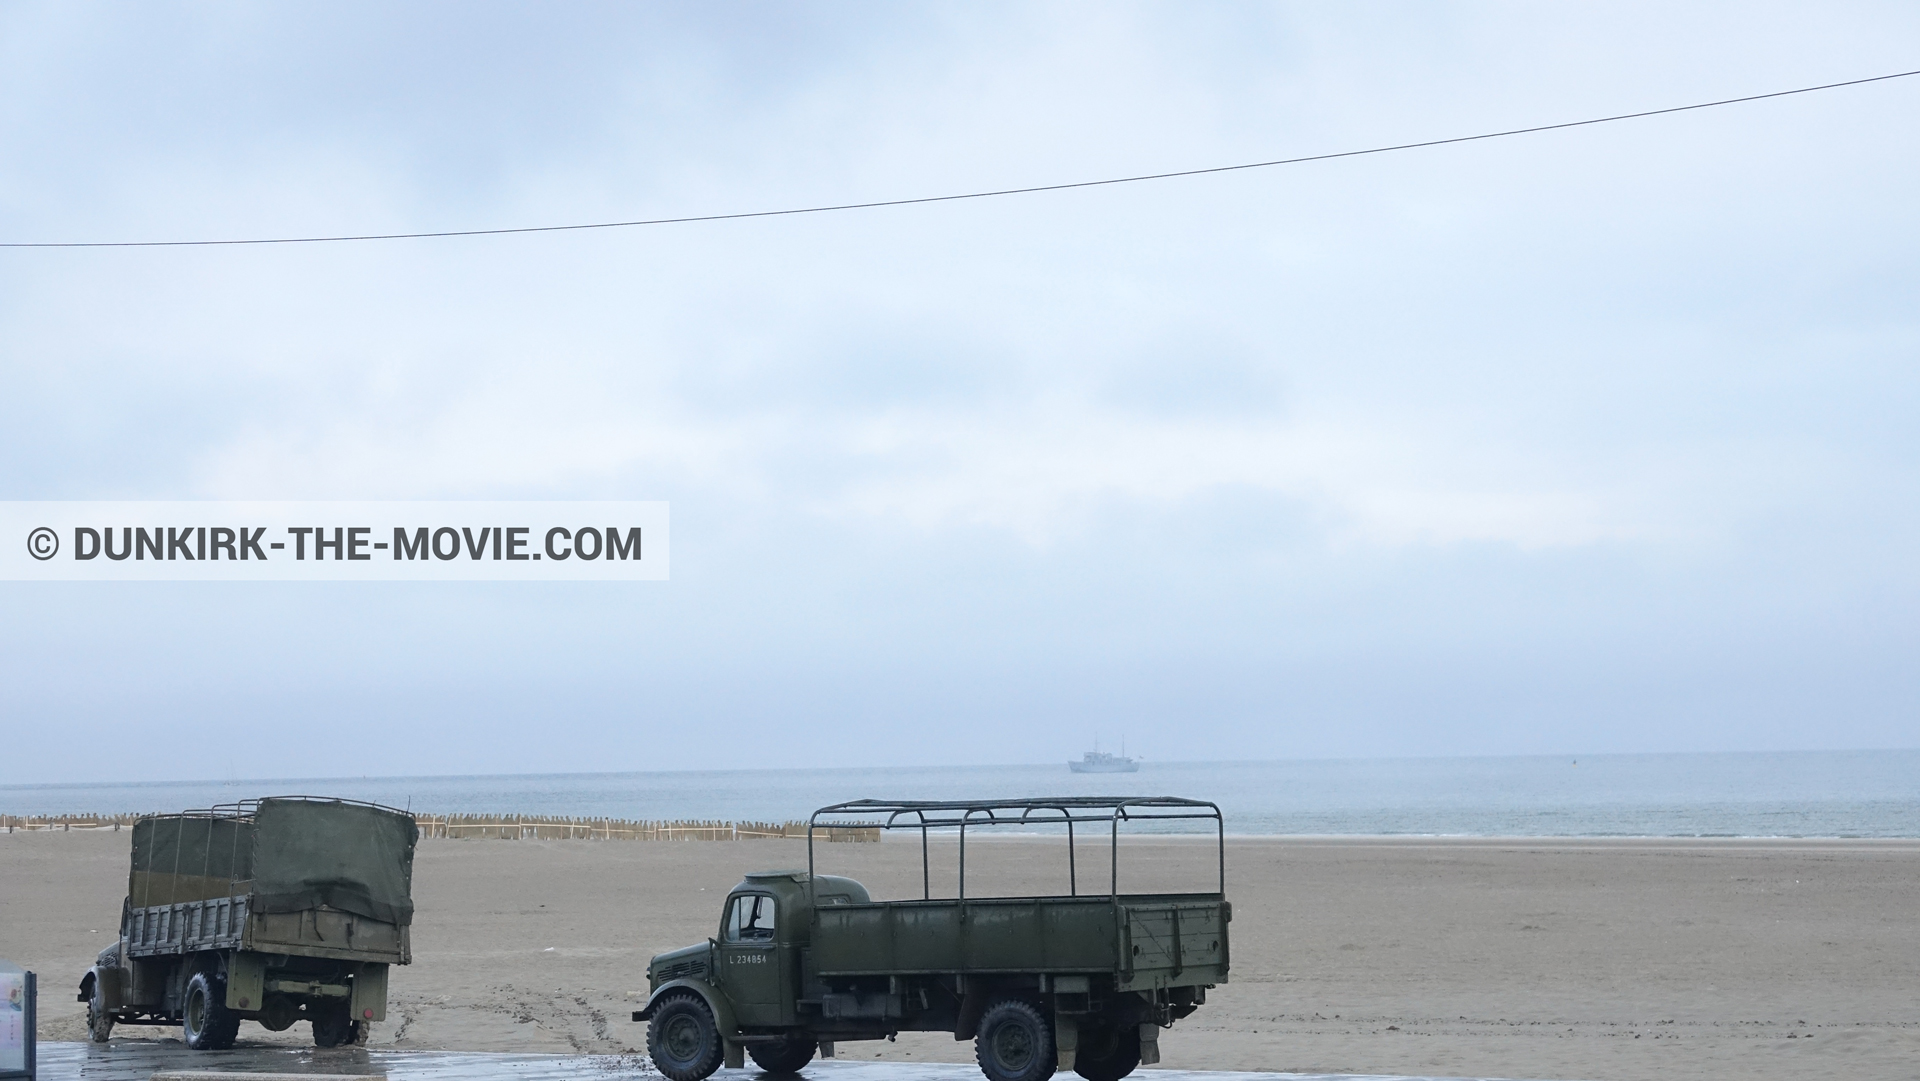 Picture with truck, cloudy sky, beach,  from behind the scene of the Dunkirk movie by Nolan